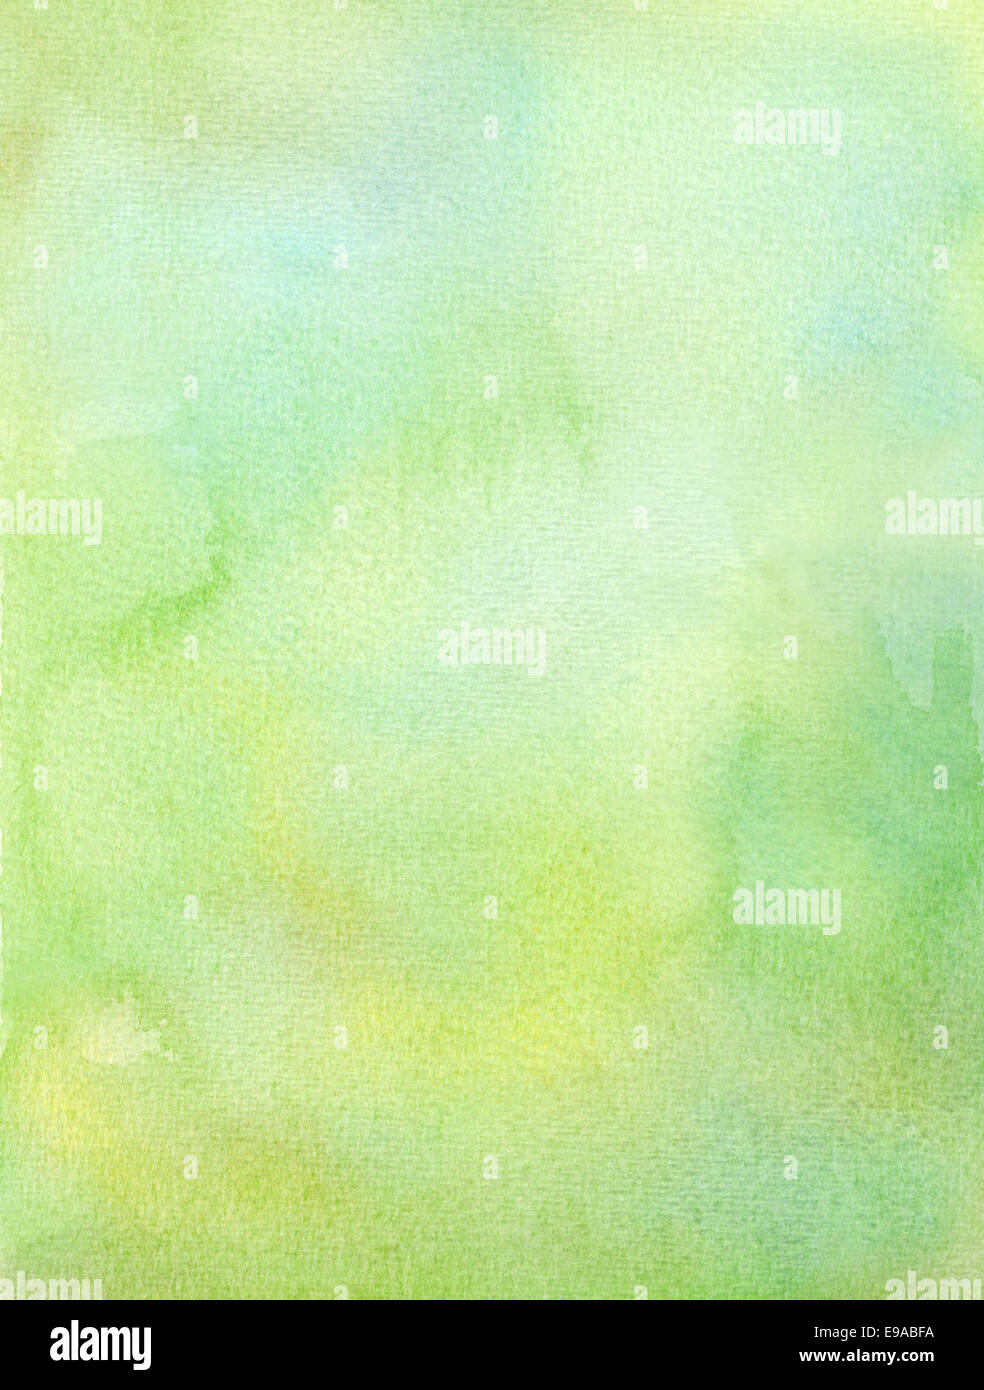 watercolor - abstract background Stock Photo